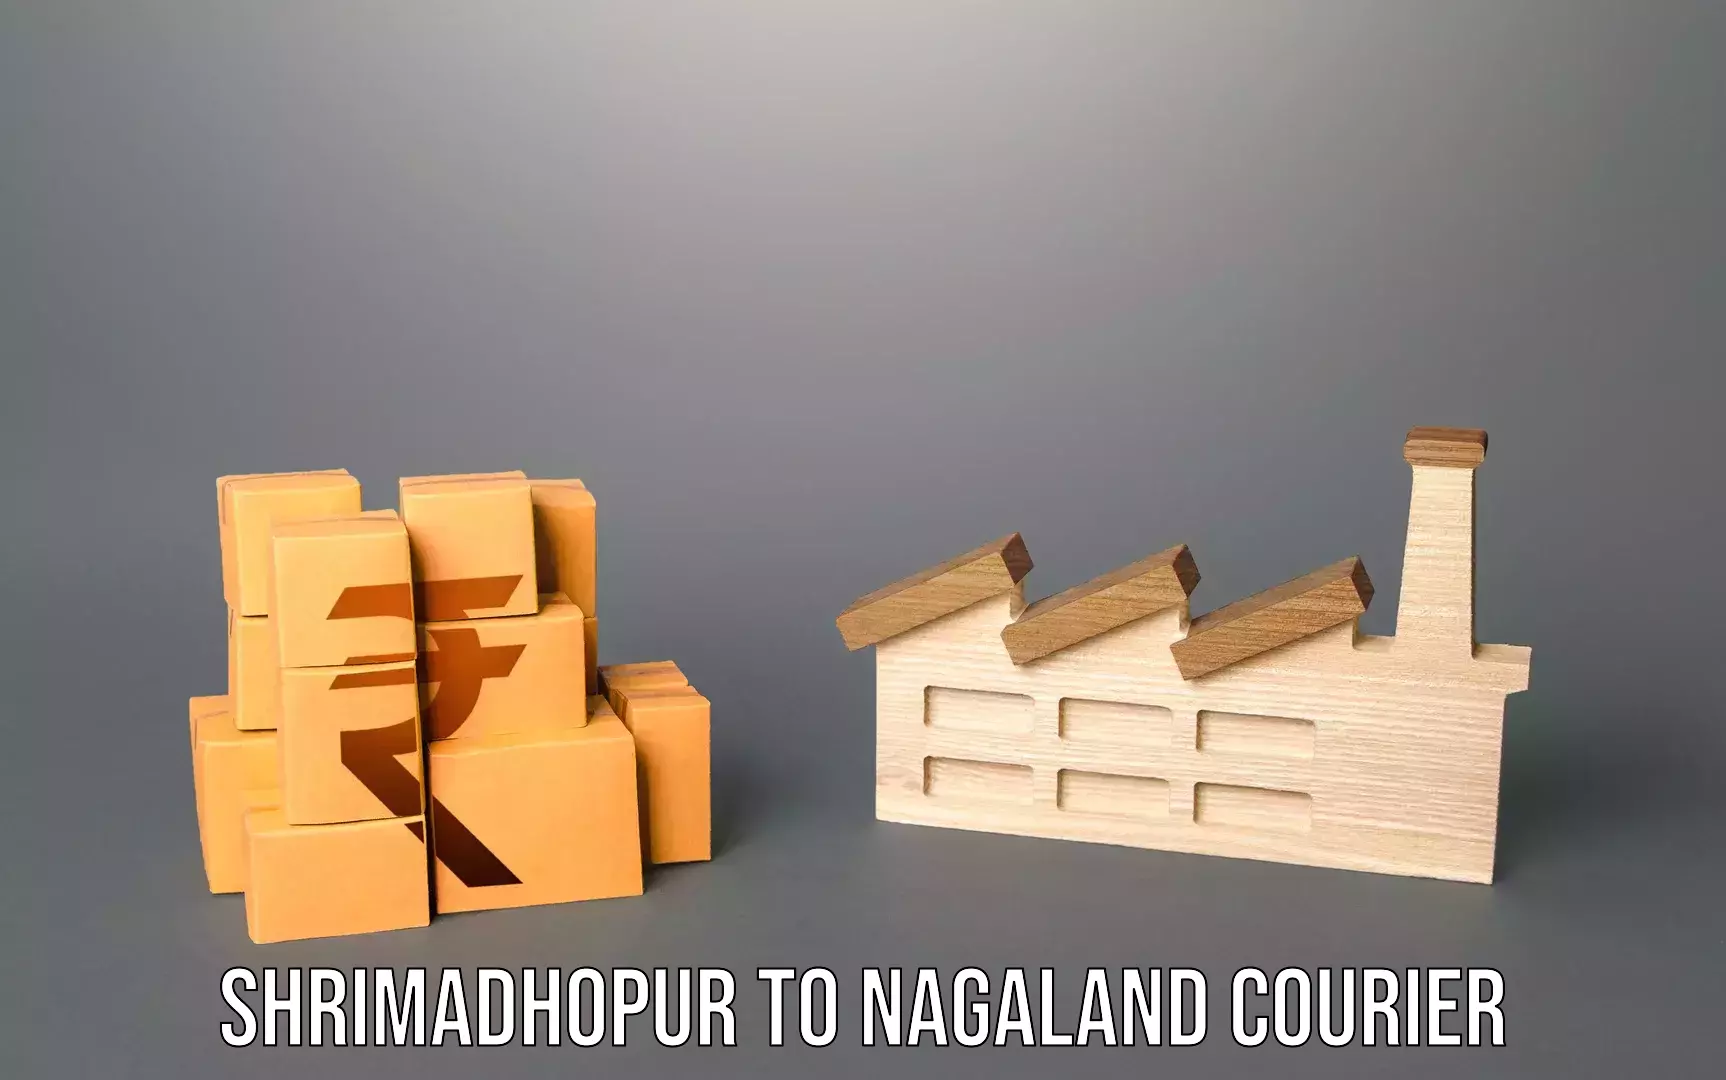 Luggage delivery app Shrimadhopur to Dimapur